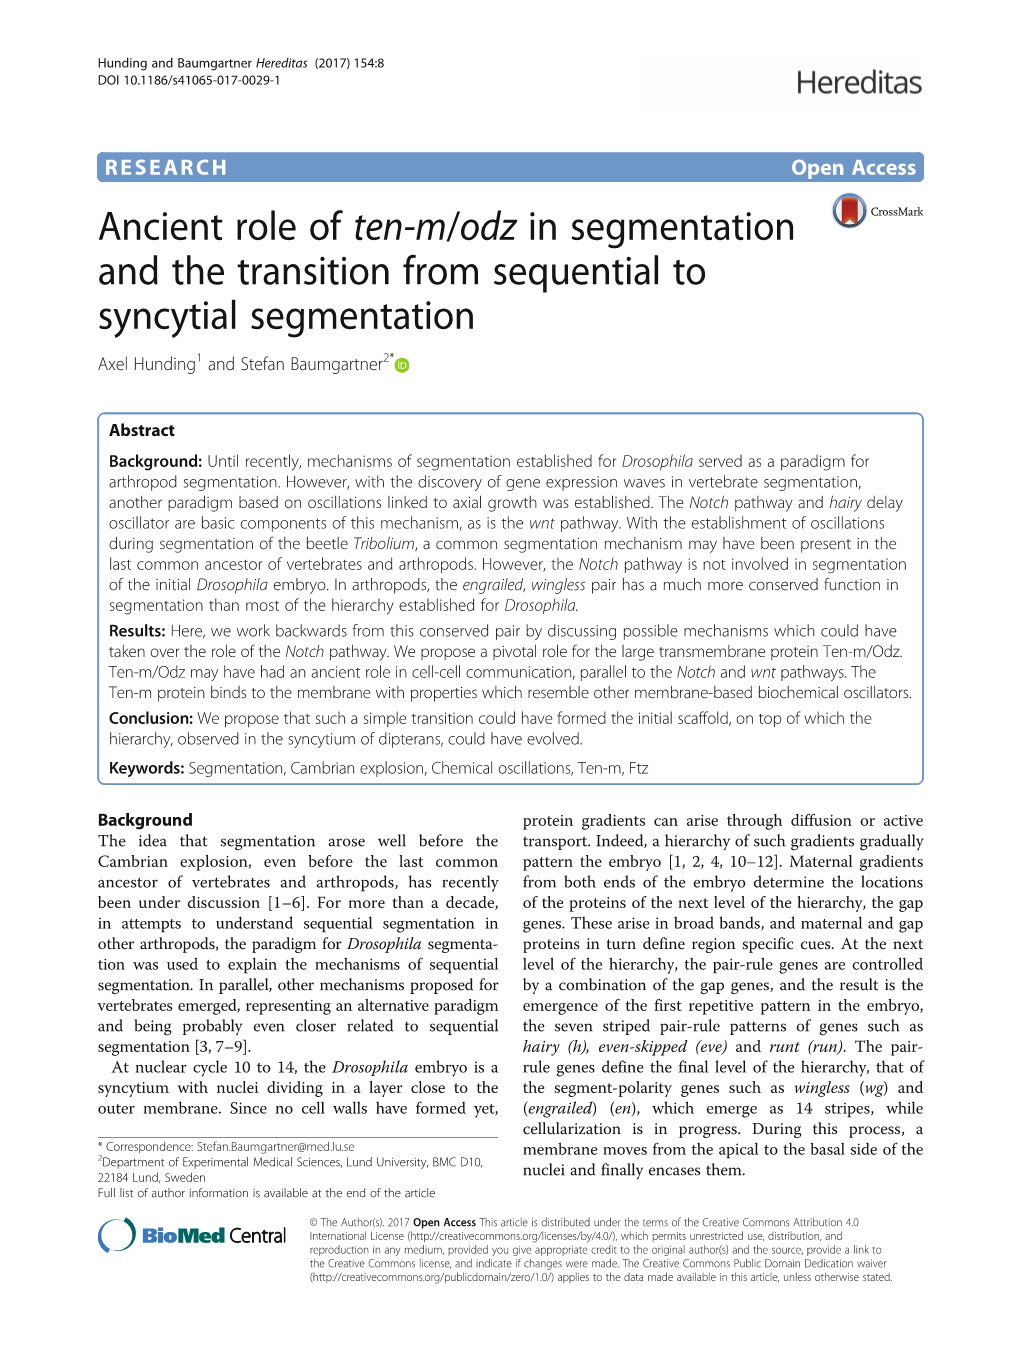 Ancient Role of Ten-M/Odz in Segmentation and the Transition from Sequential to Syncytial Segmentation Axel Hunding1 and Stefan Baumgartner2*